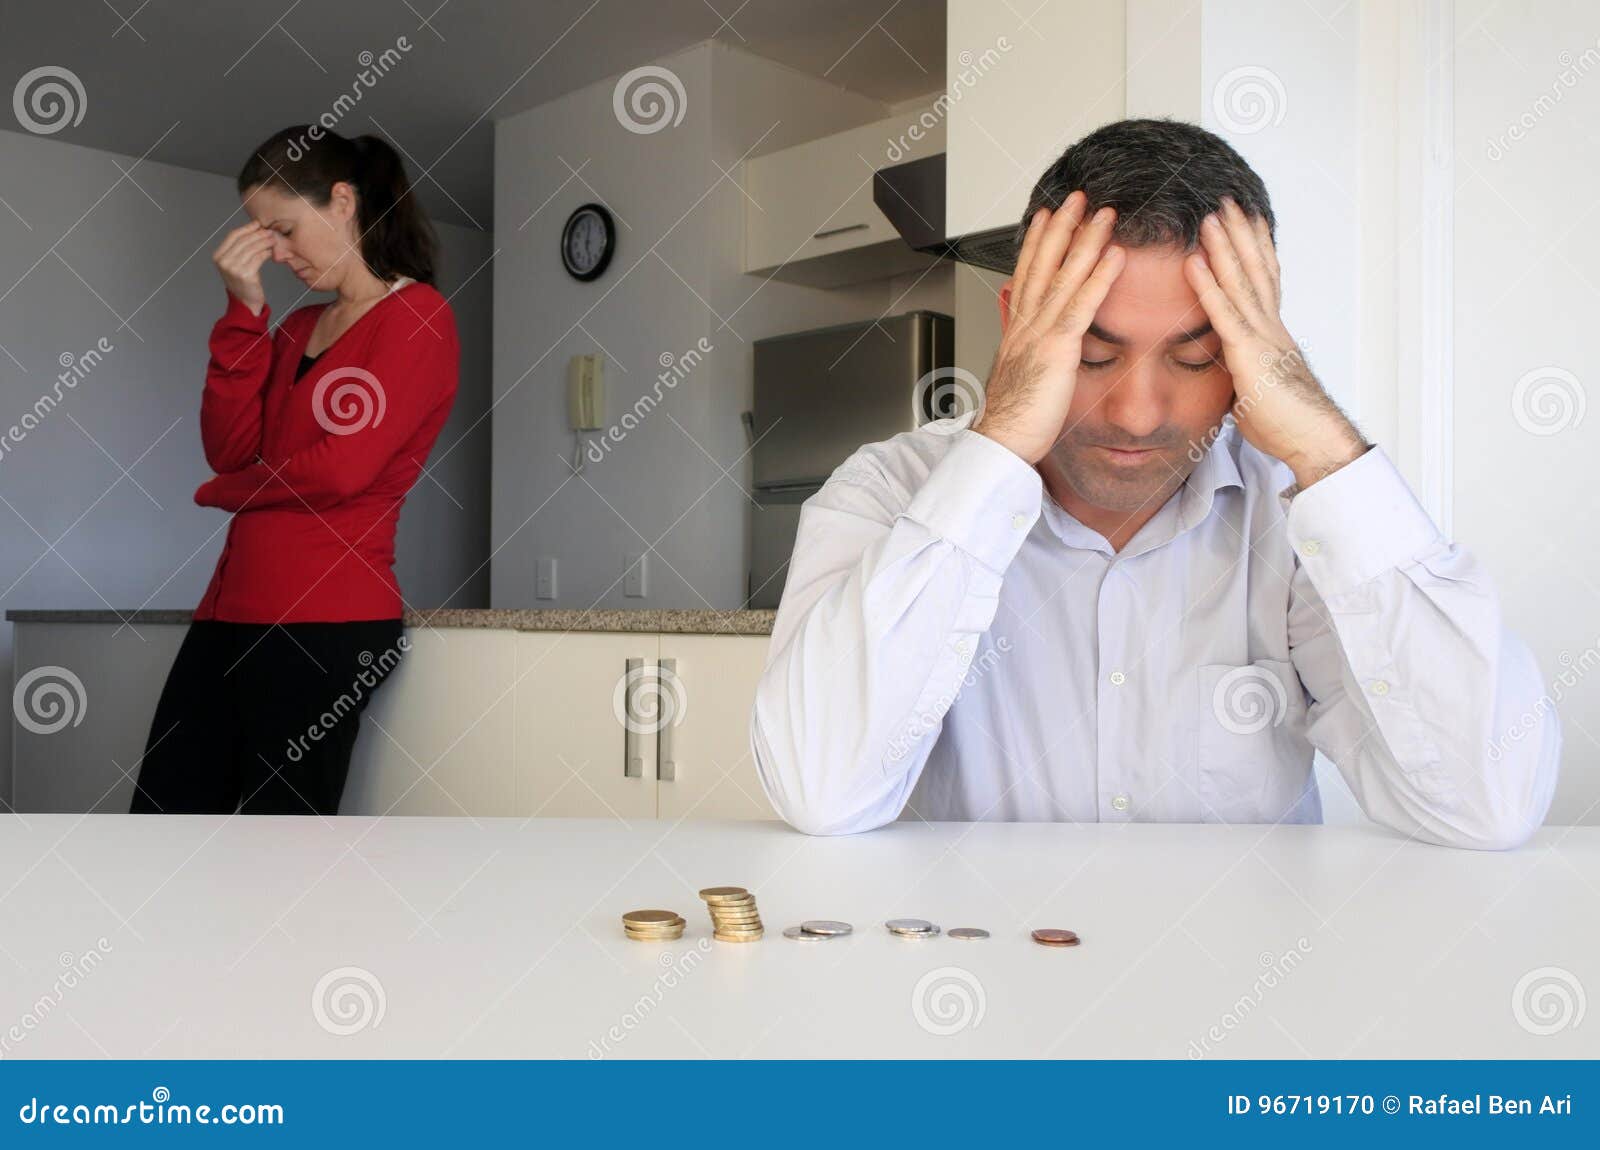 Hosband and Wife Having Financial Problems Stock Photo pic